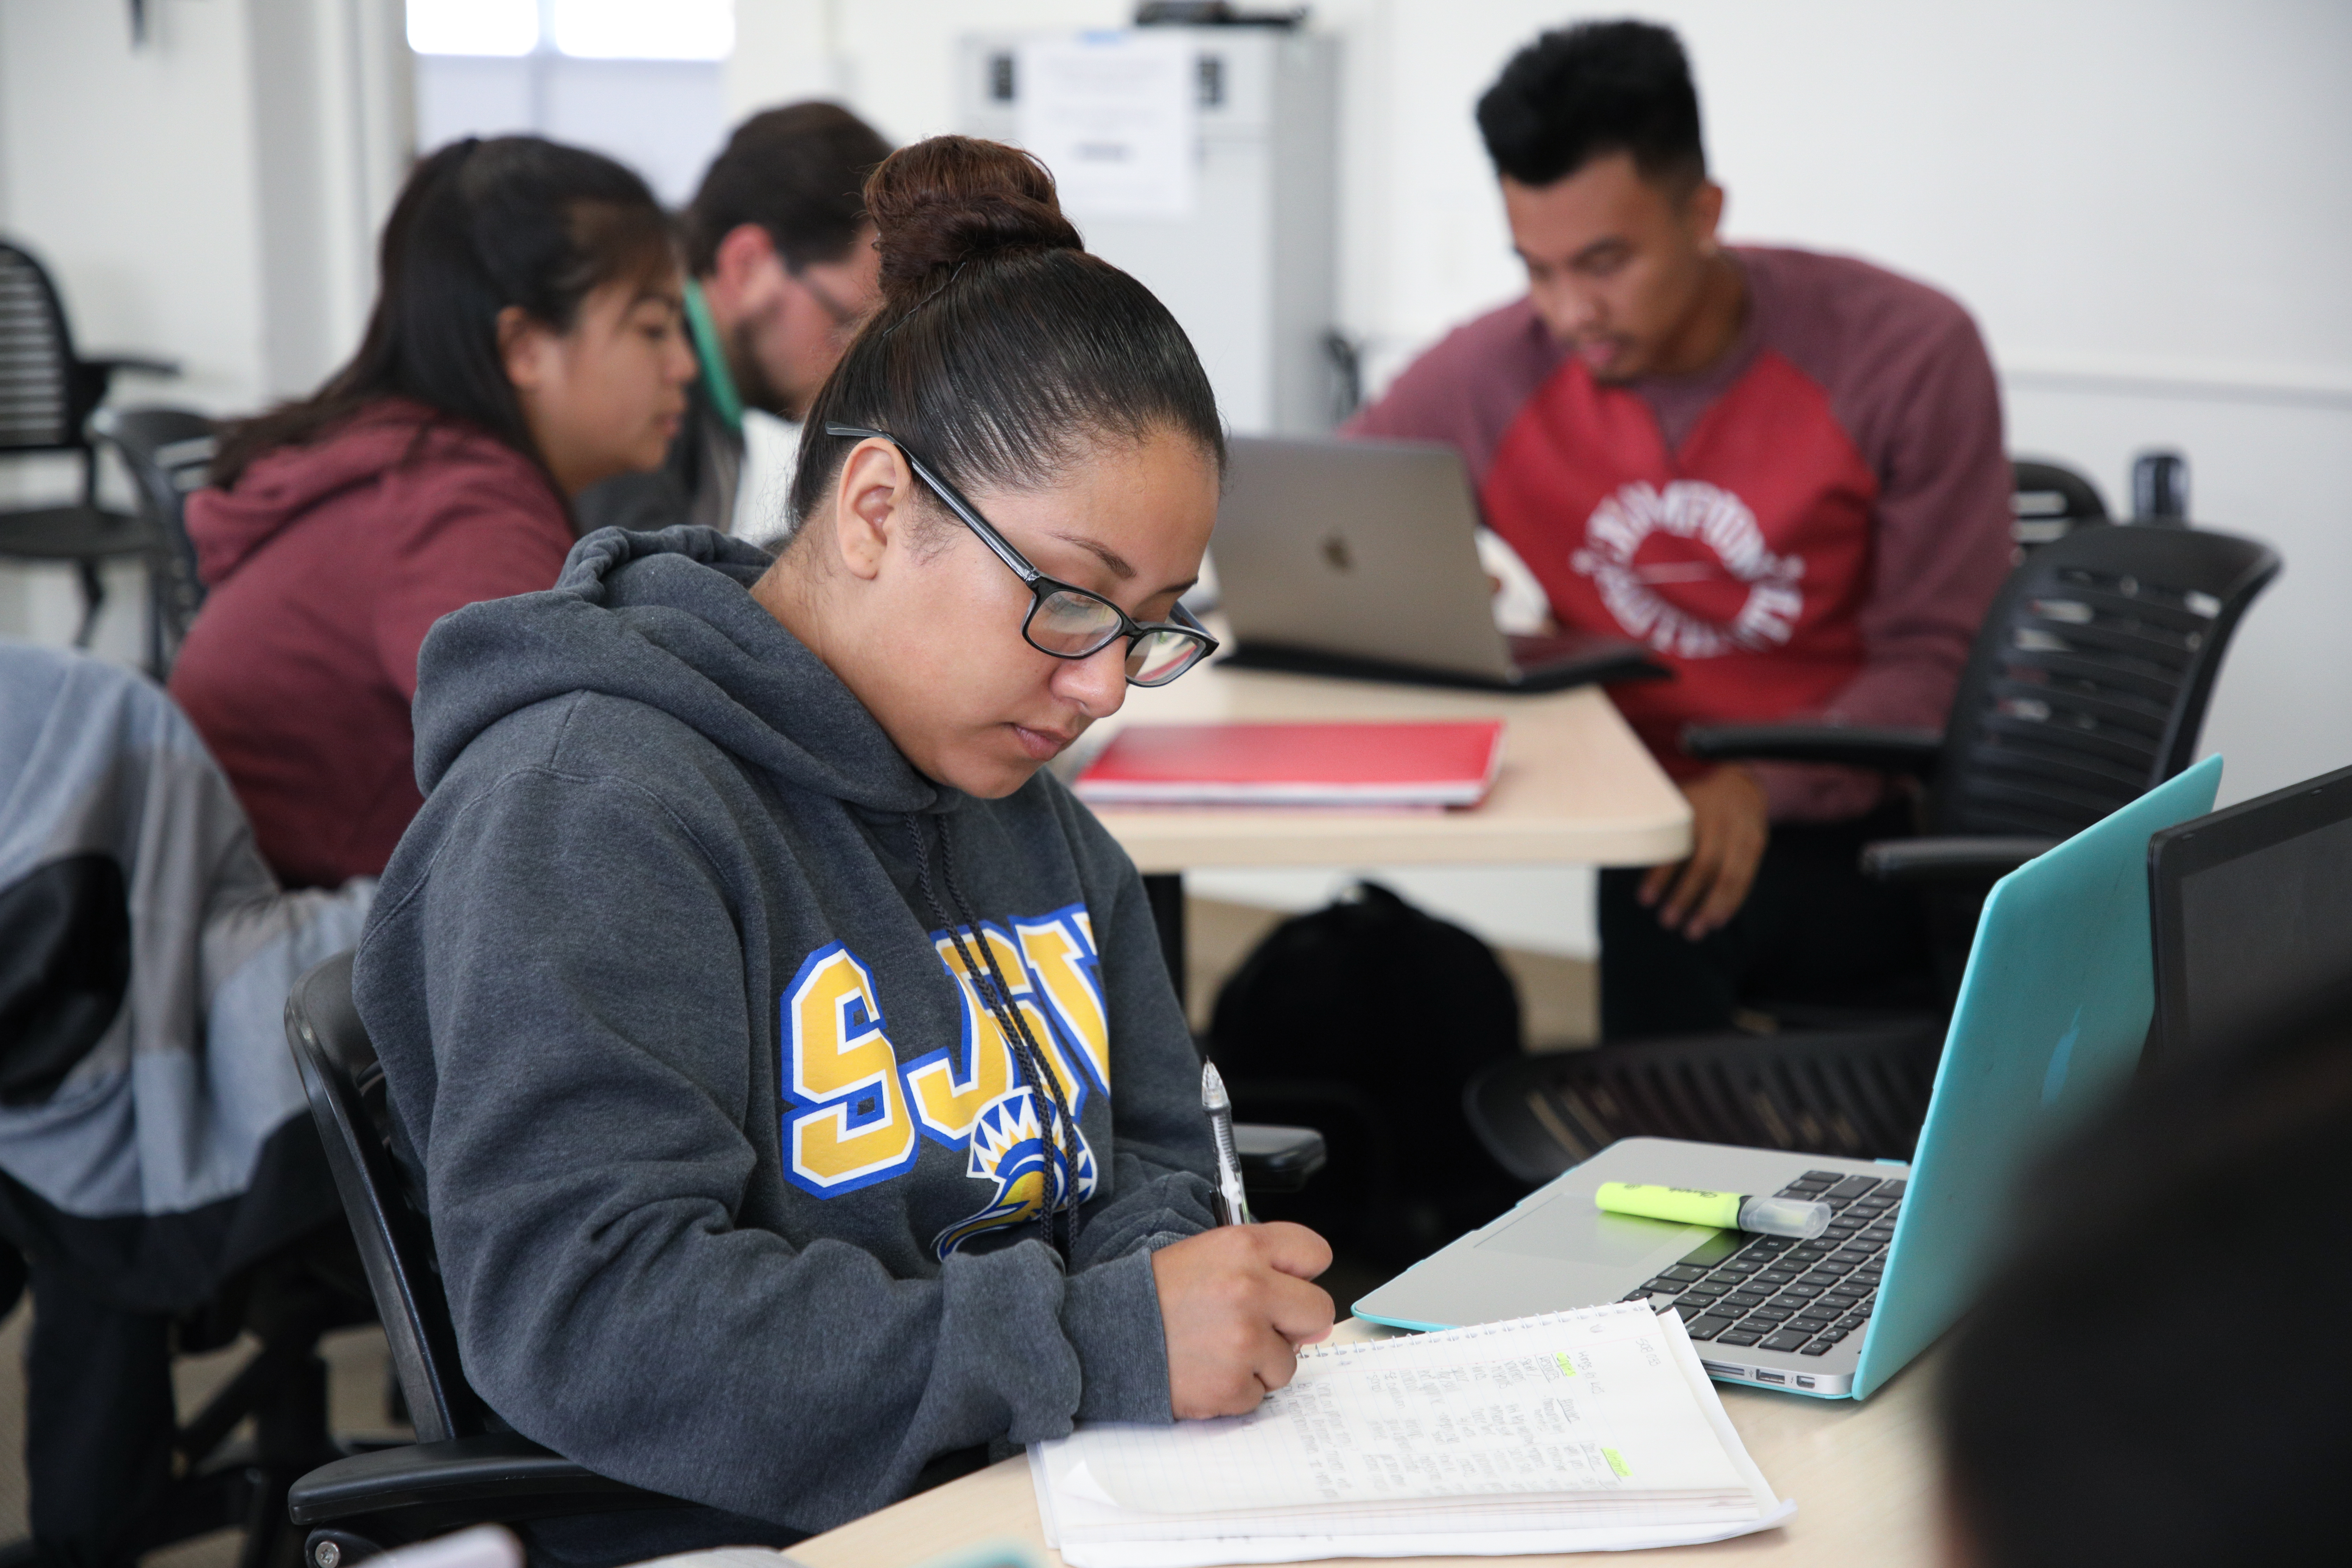 A female student wearing an SJSU sweatshirt sits and takes notes off a laptop screen. Other students are out of focus in the background doing the same. 